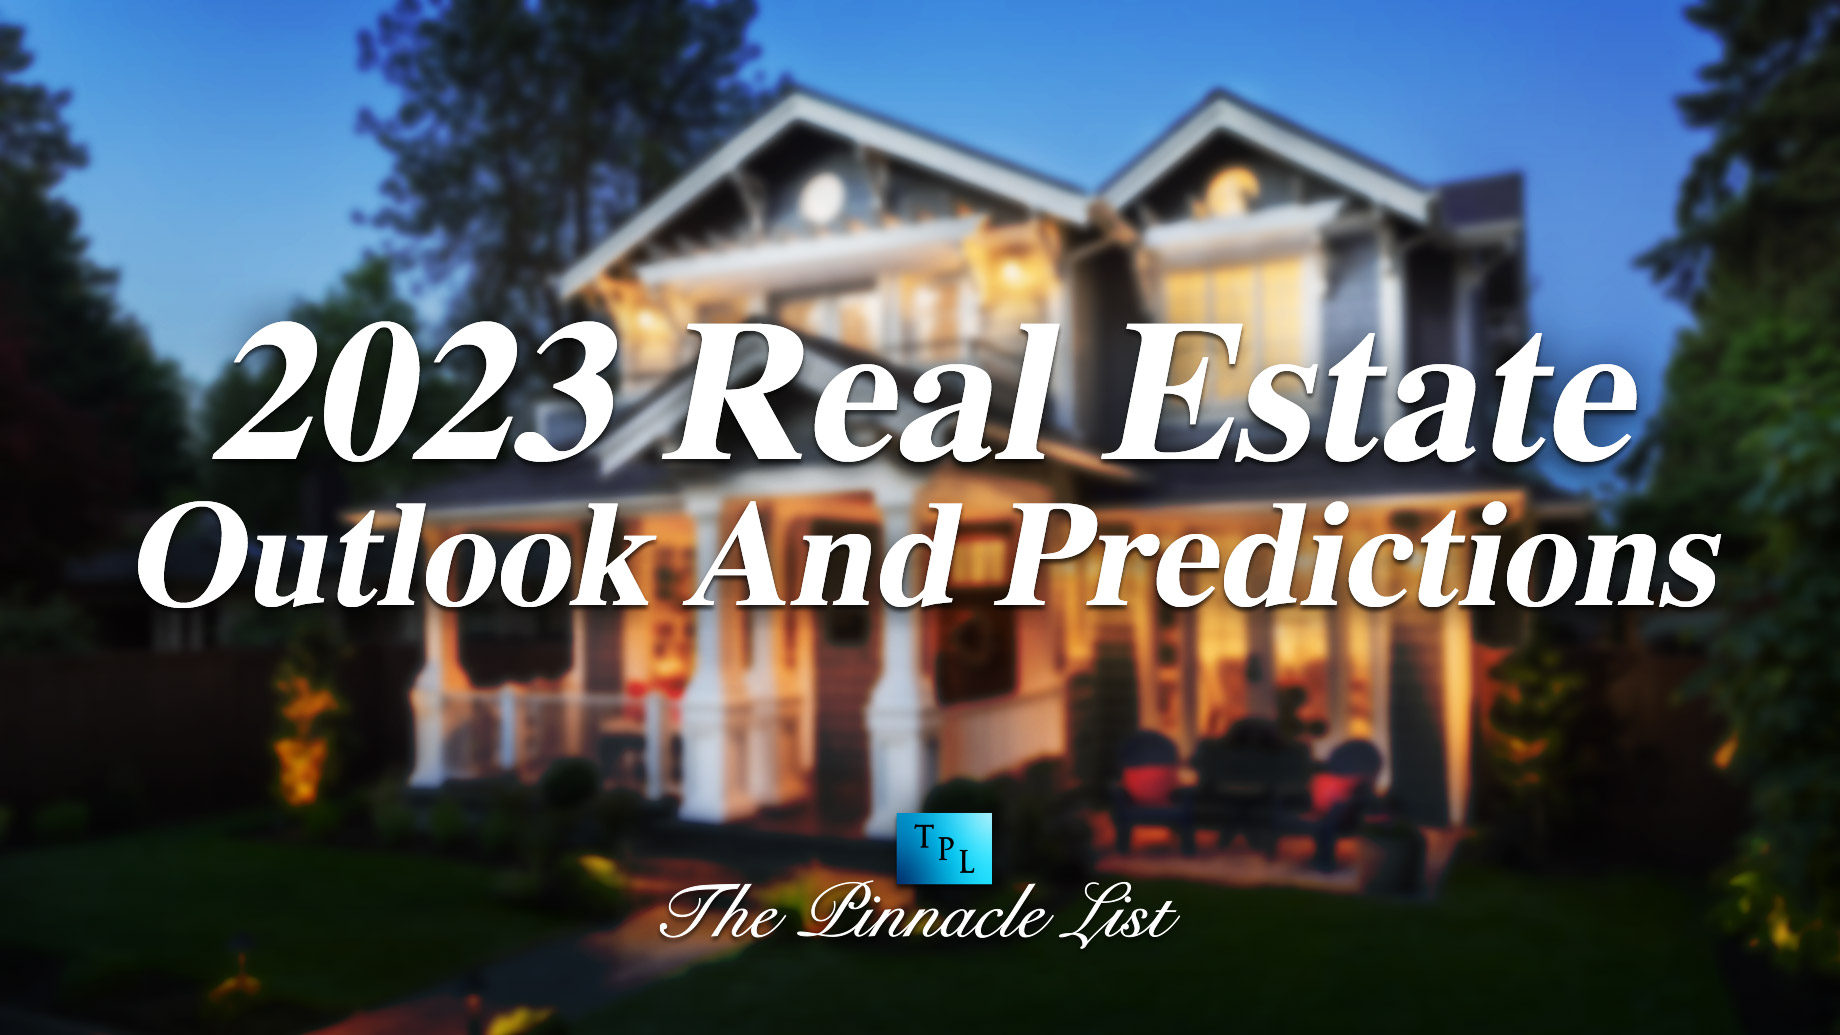 2023 Real Estate Outlook And Predictions